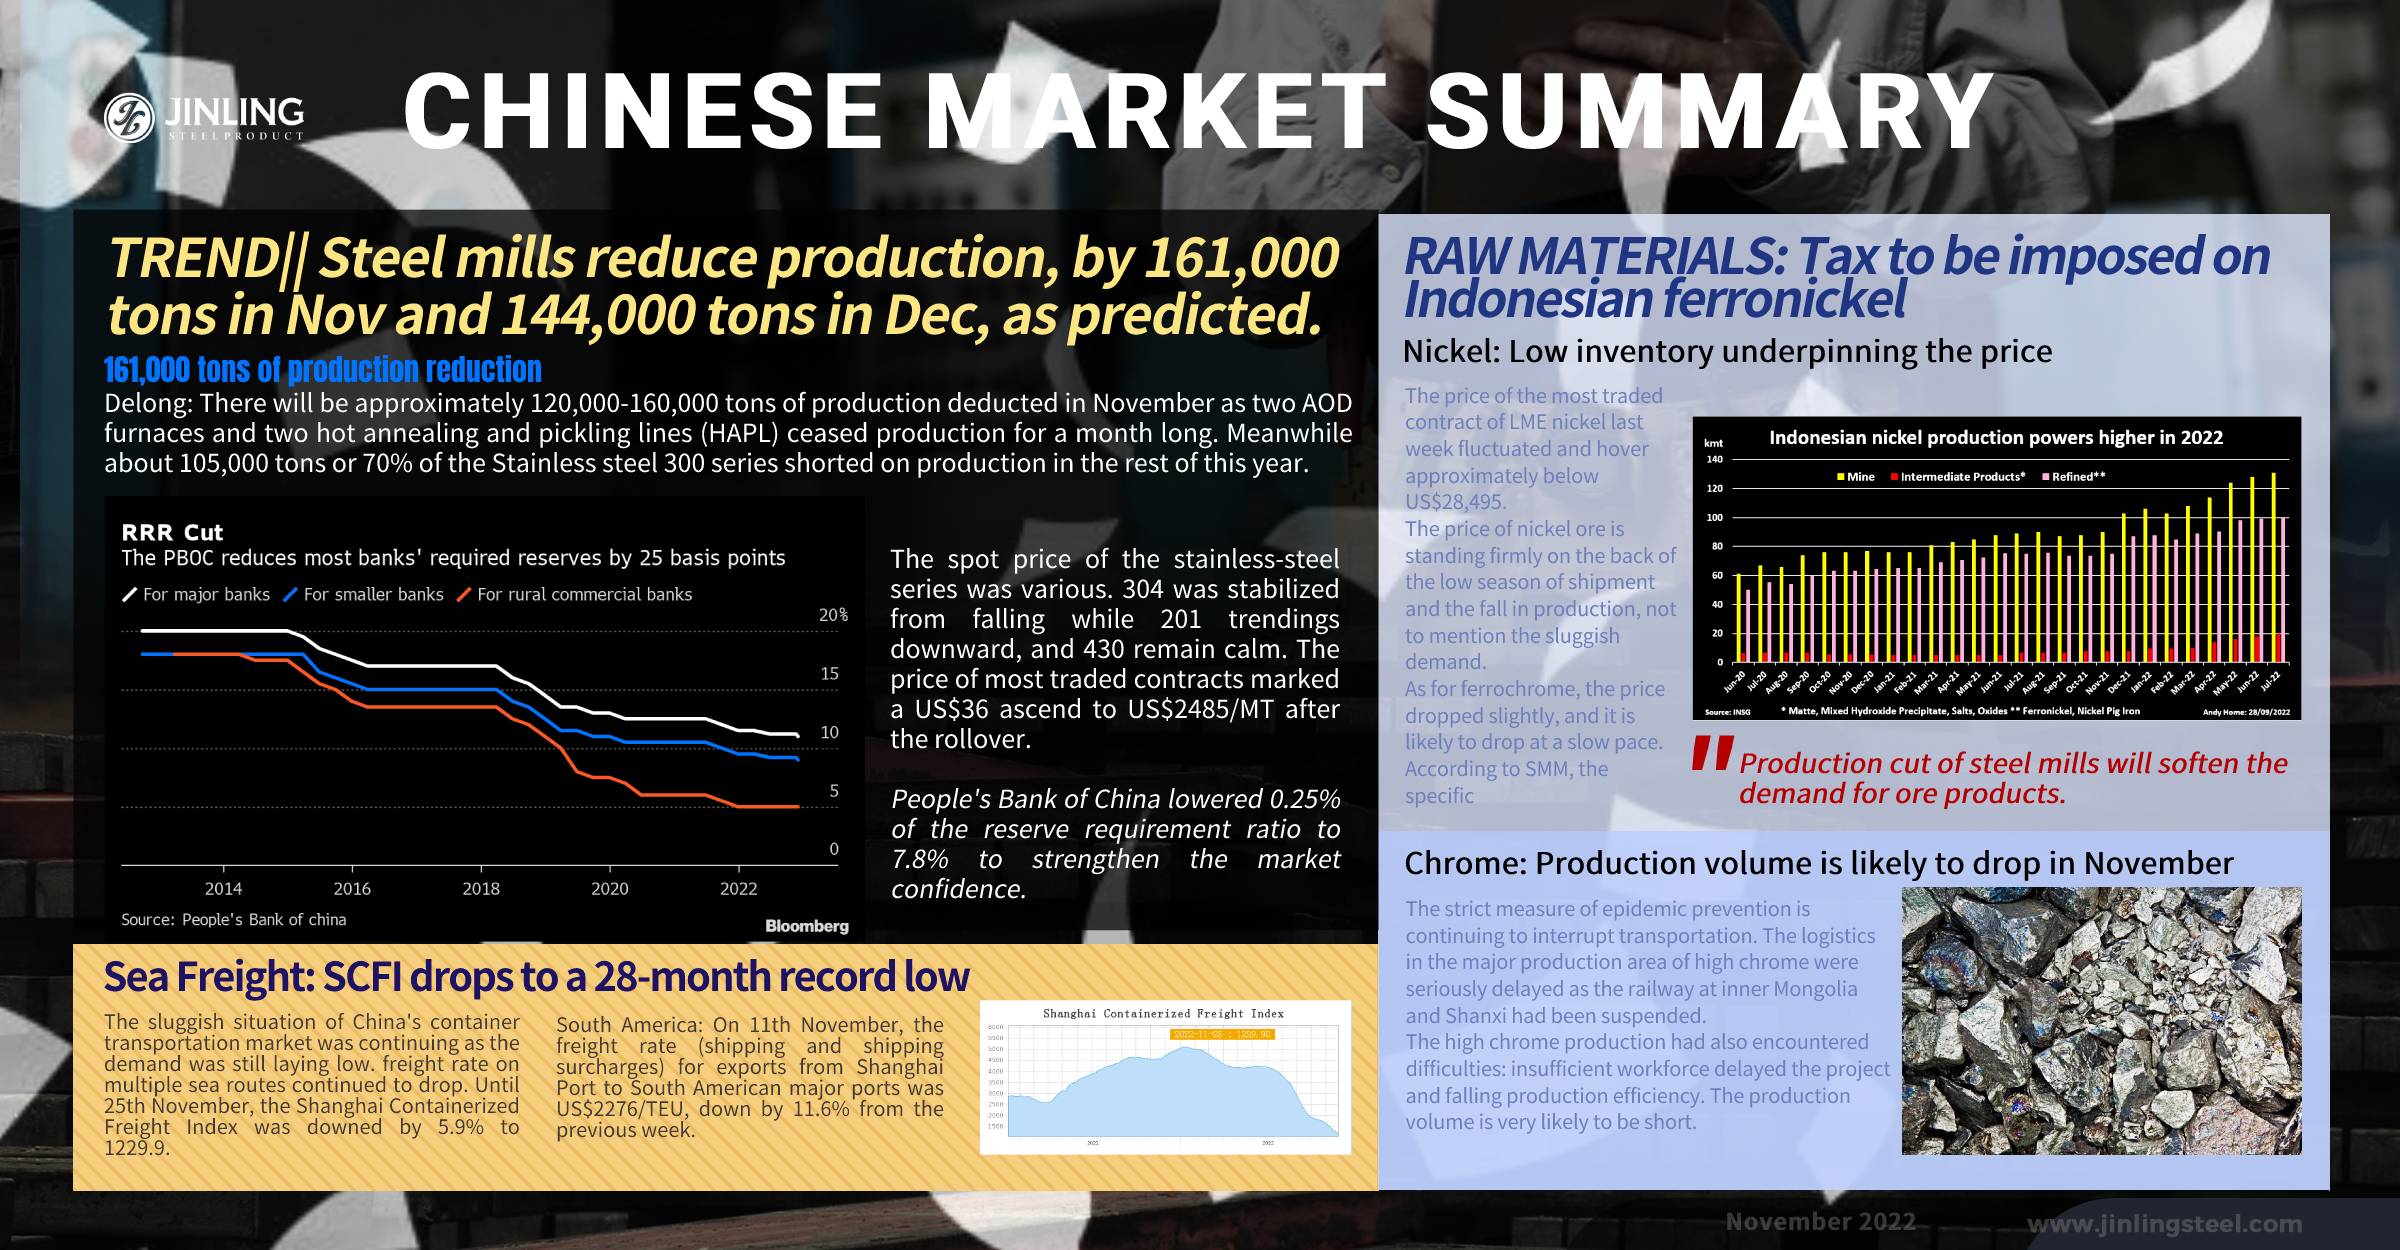 Stainless Steel Market Summary in China ||  Over 300,000 tons of stainless steel production to be cut in recent two months, as predicted (Nov 21~Nov 25)